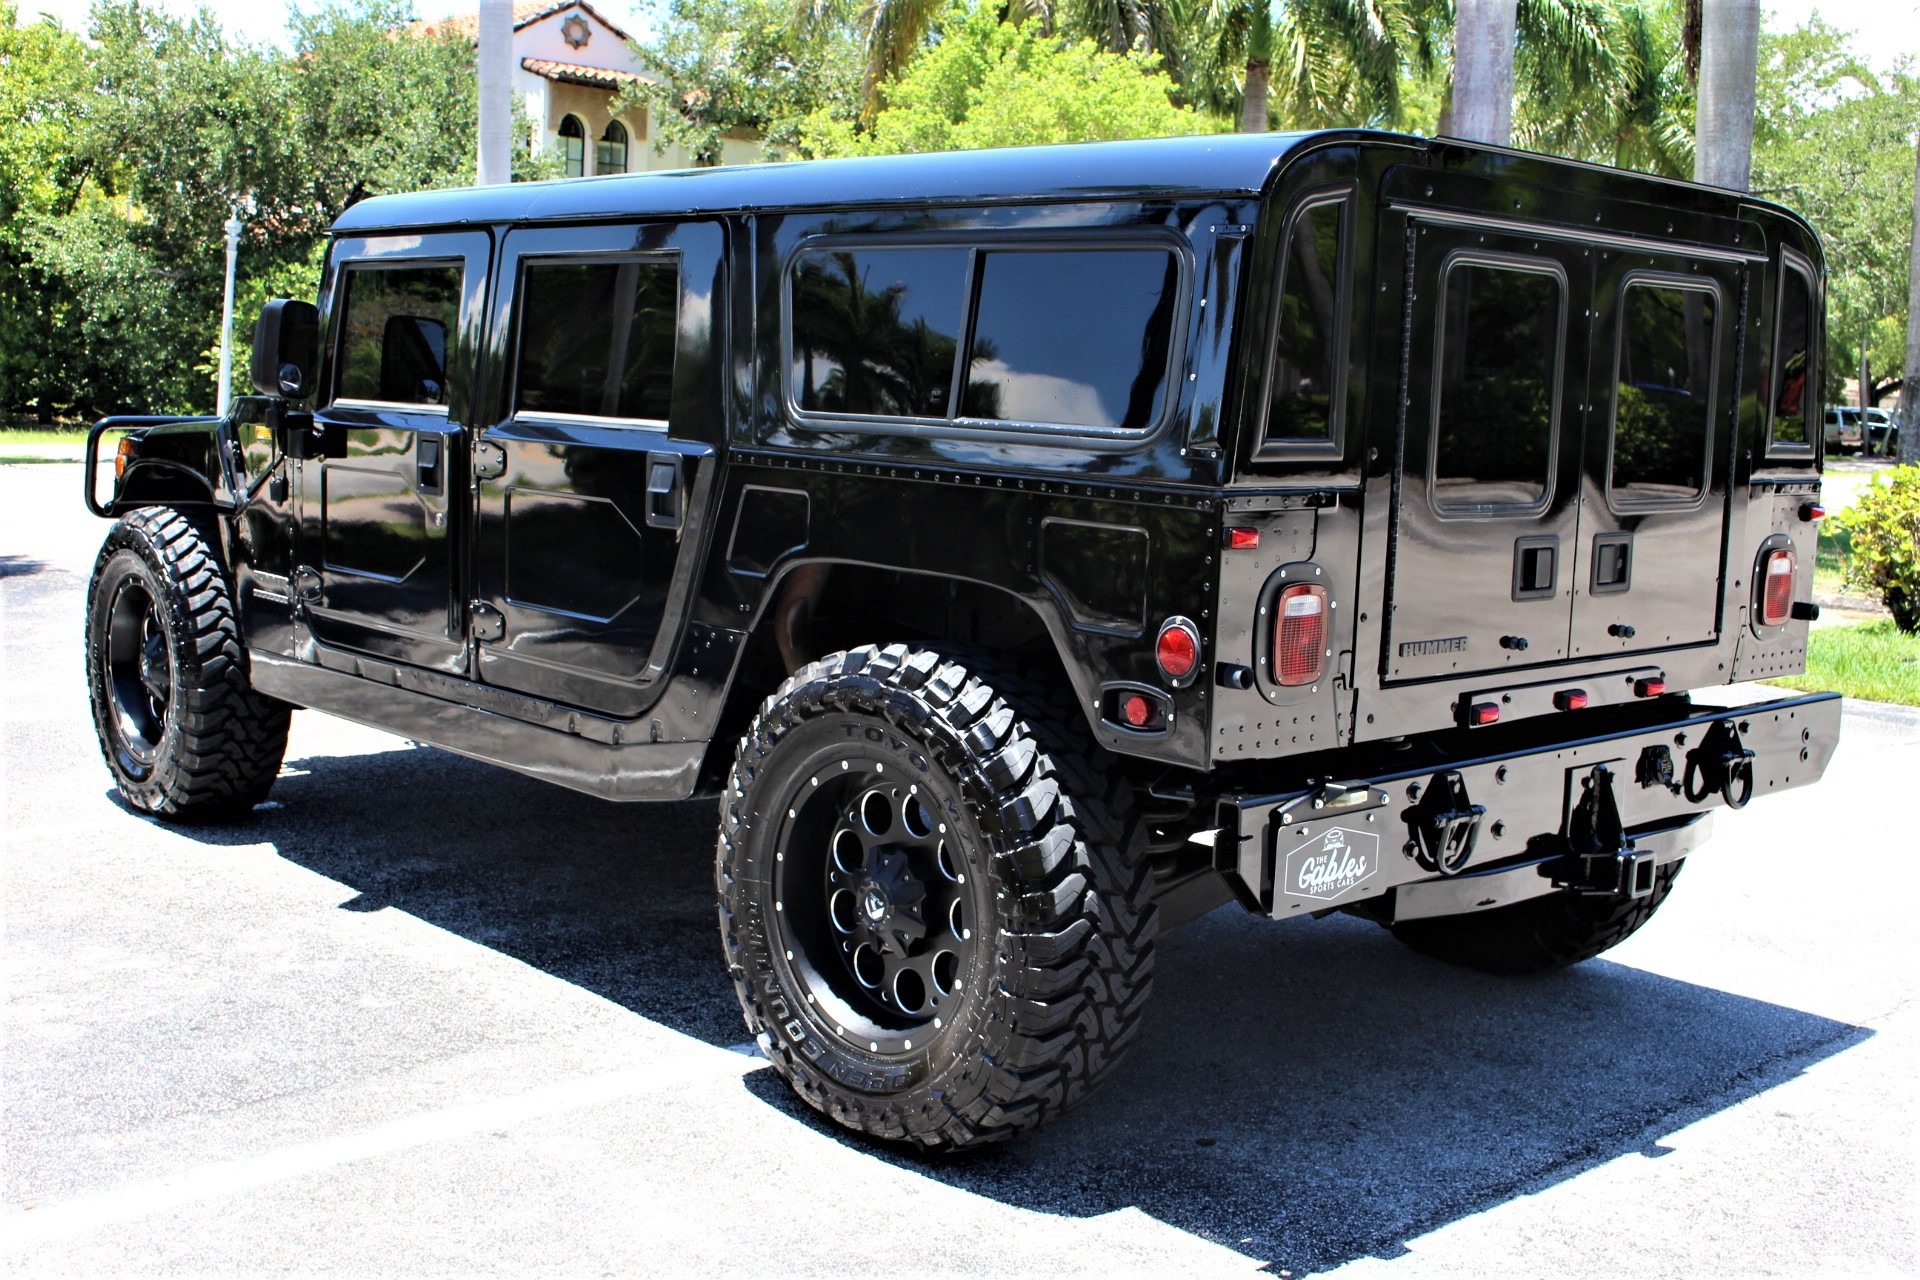 Used 2000 AM General Hummer H1 for sale Sold at The Gables Sports Cars in Miami FL 33146 4